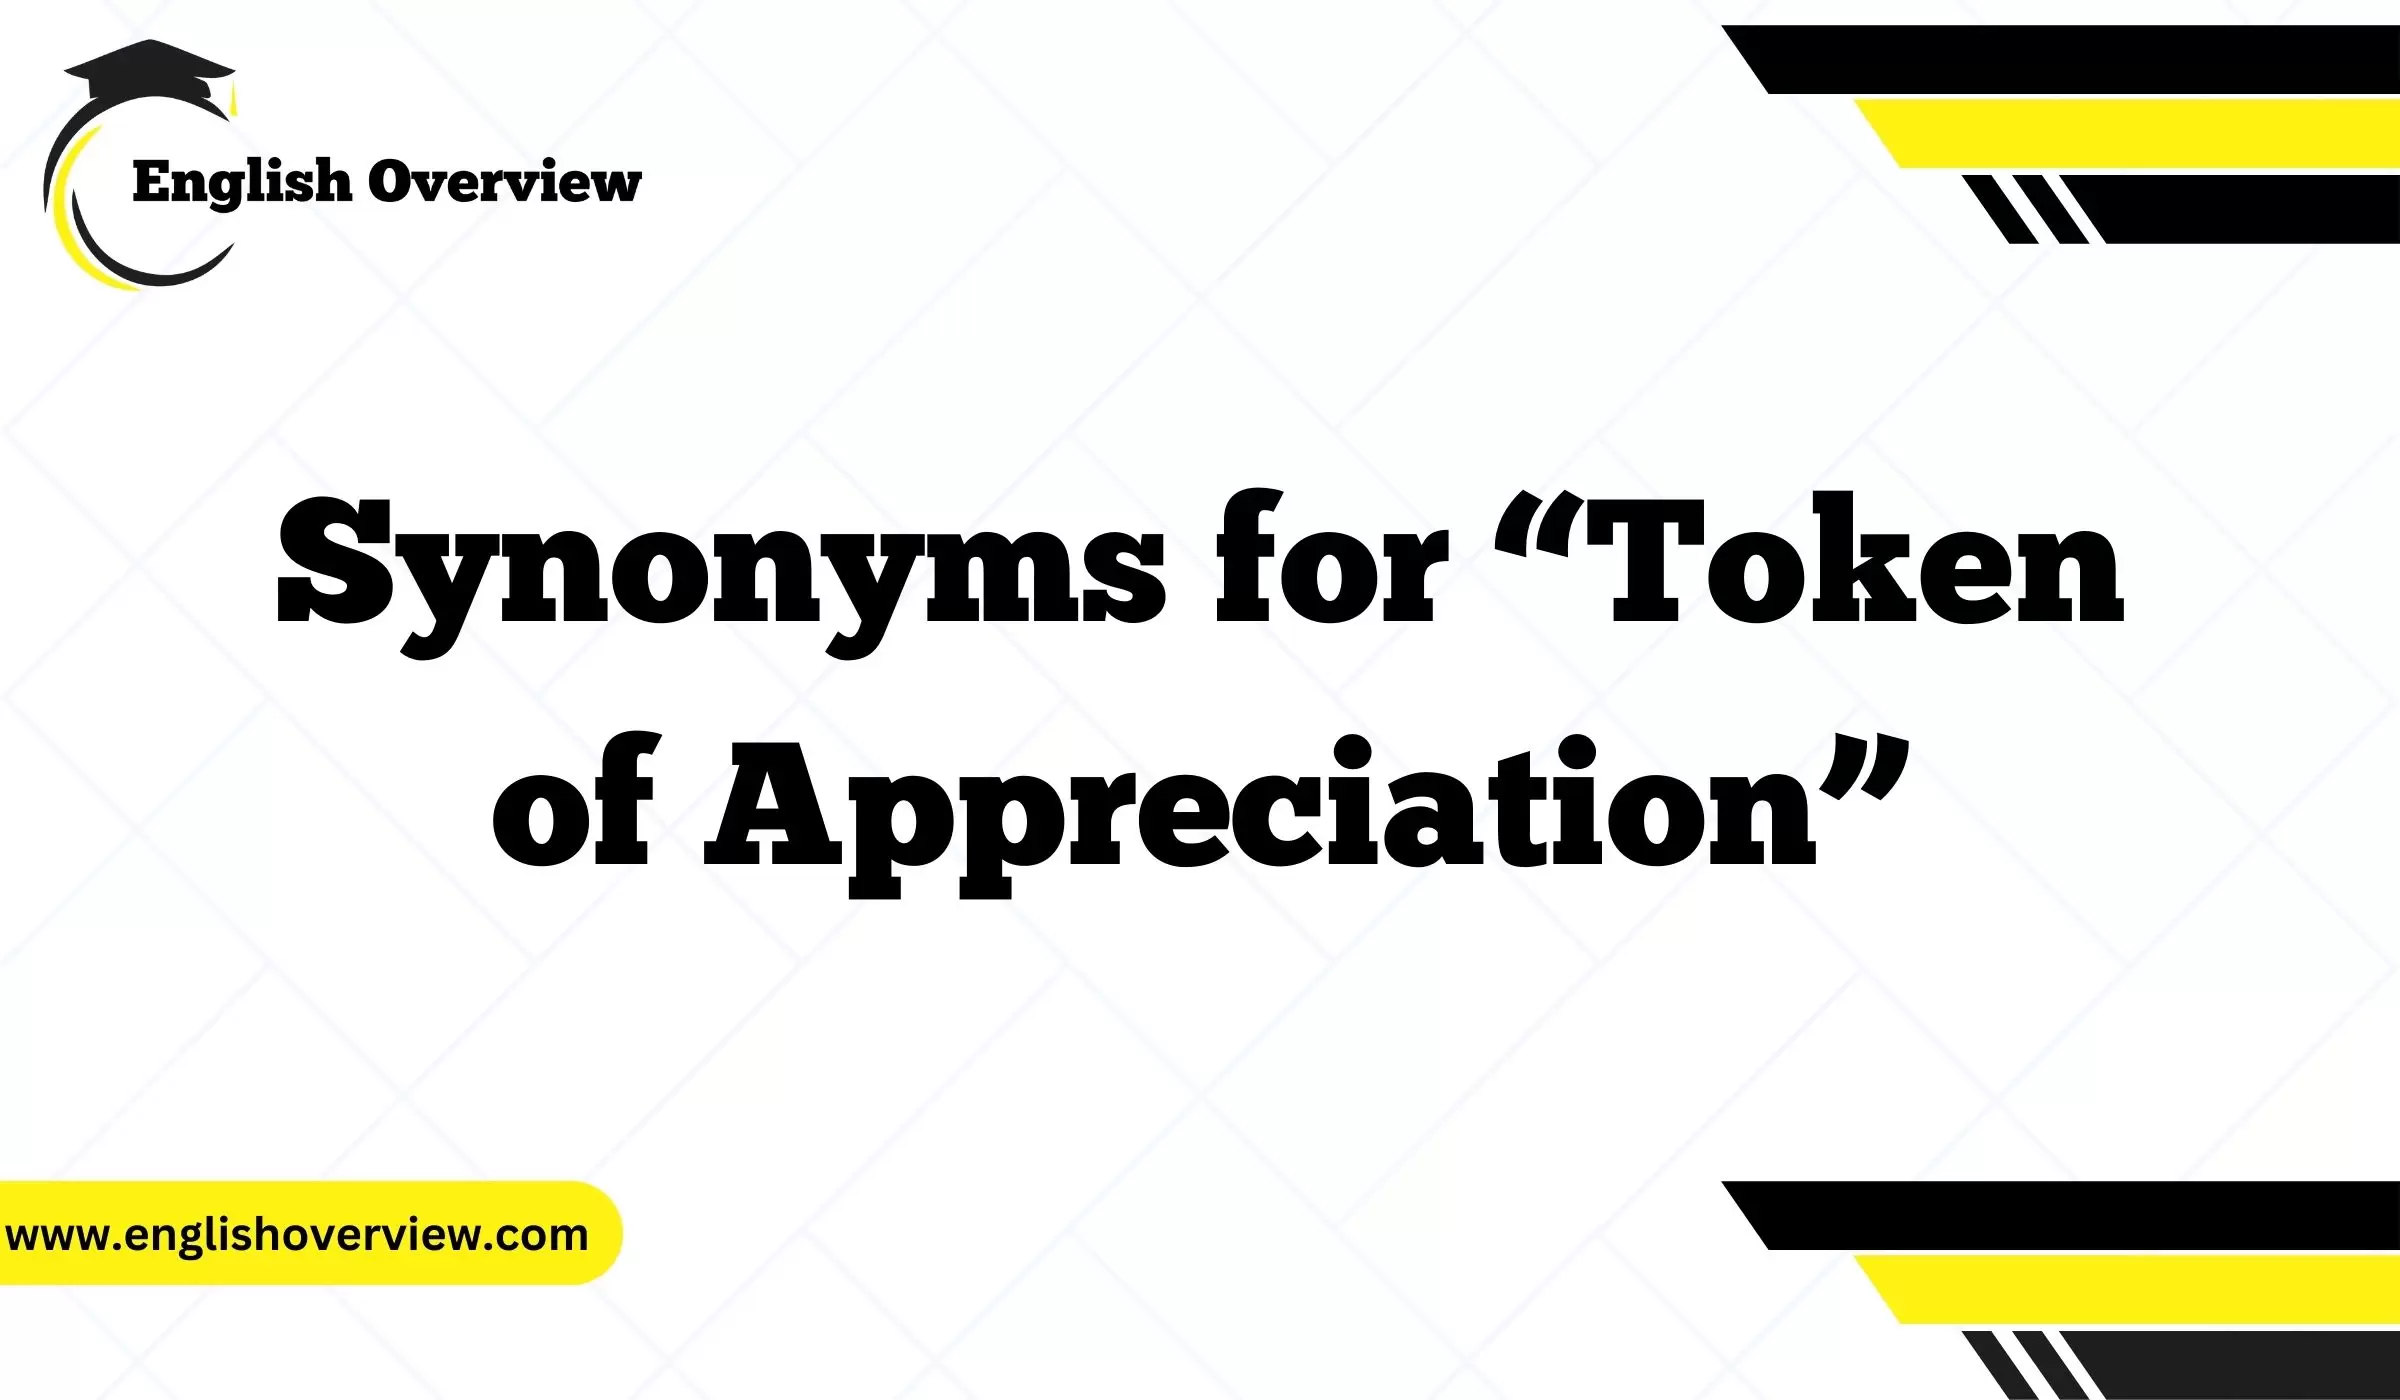 Synonyms for “Token of Appreciation”